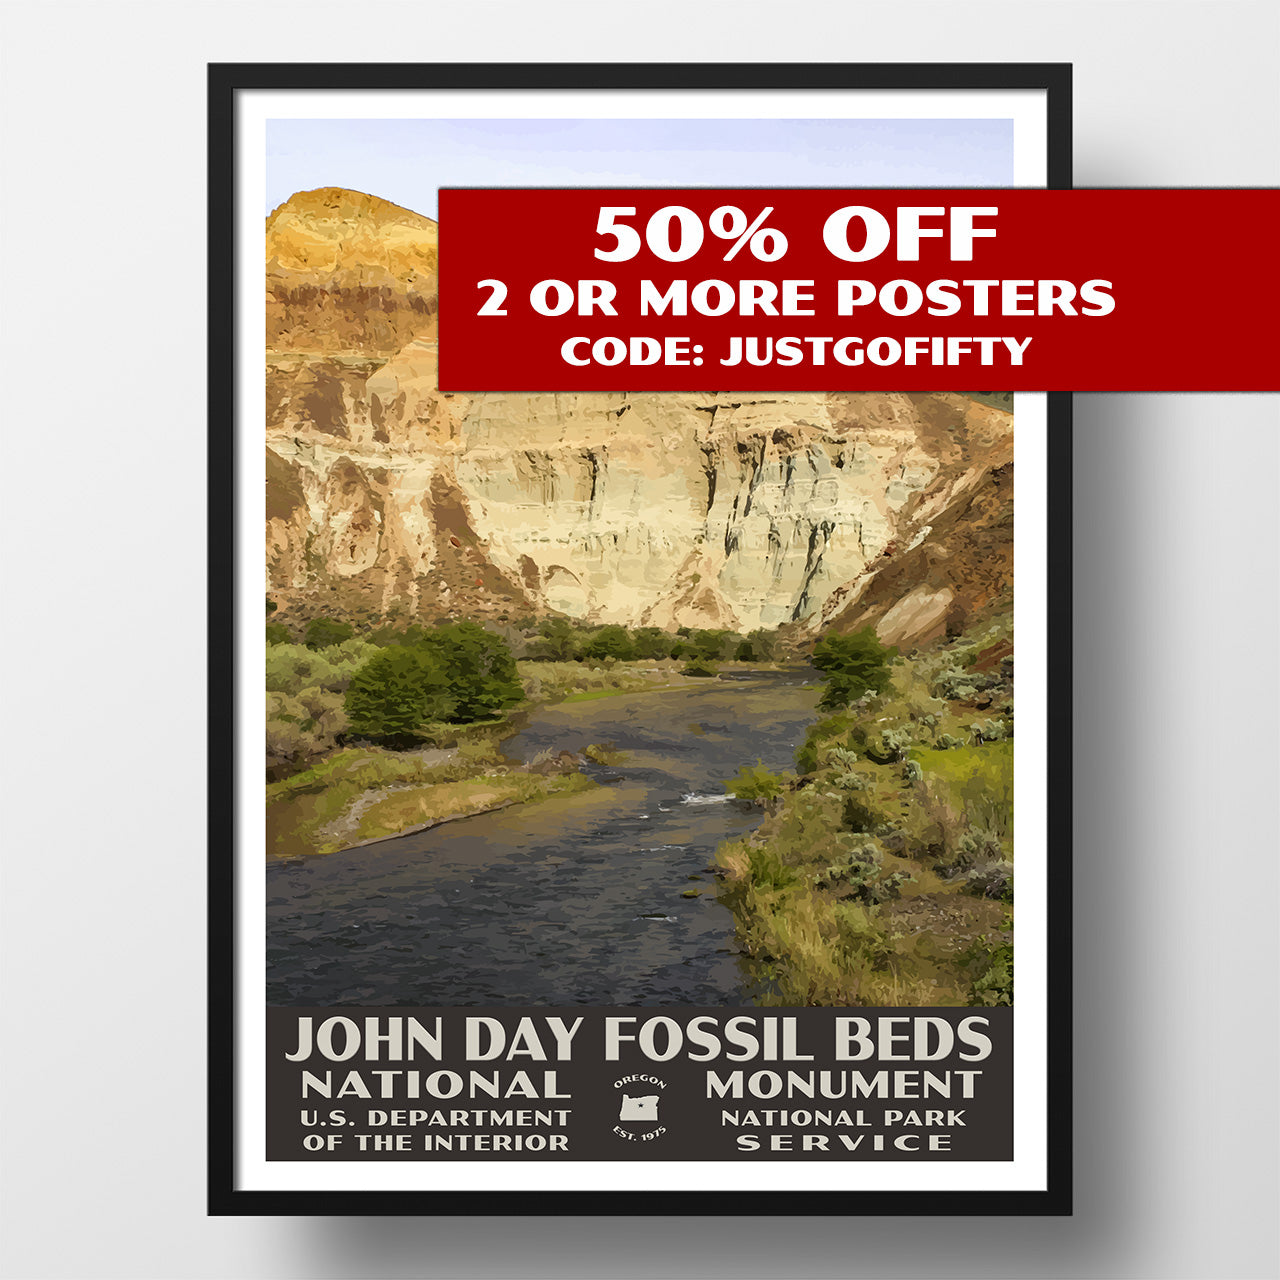 John Day Fossil Beds National Monument poster